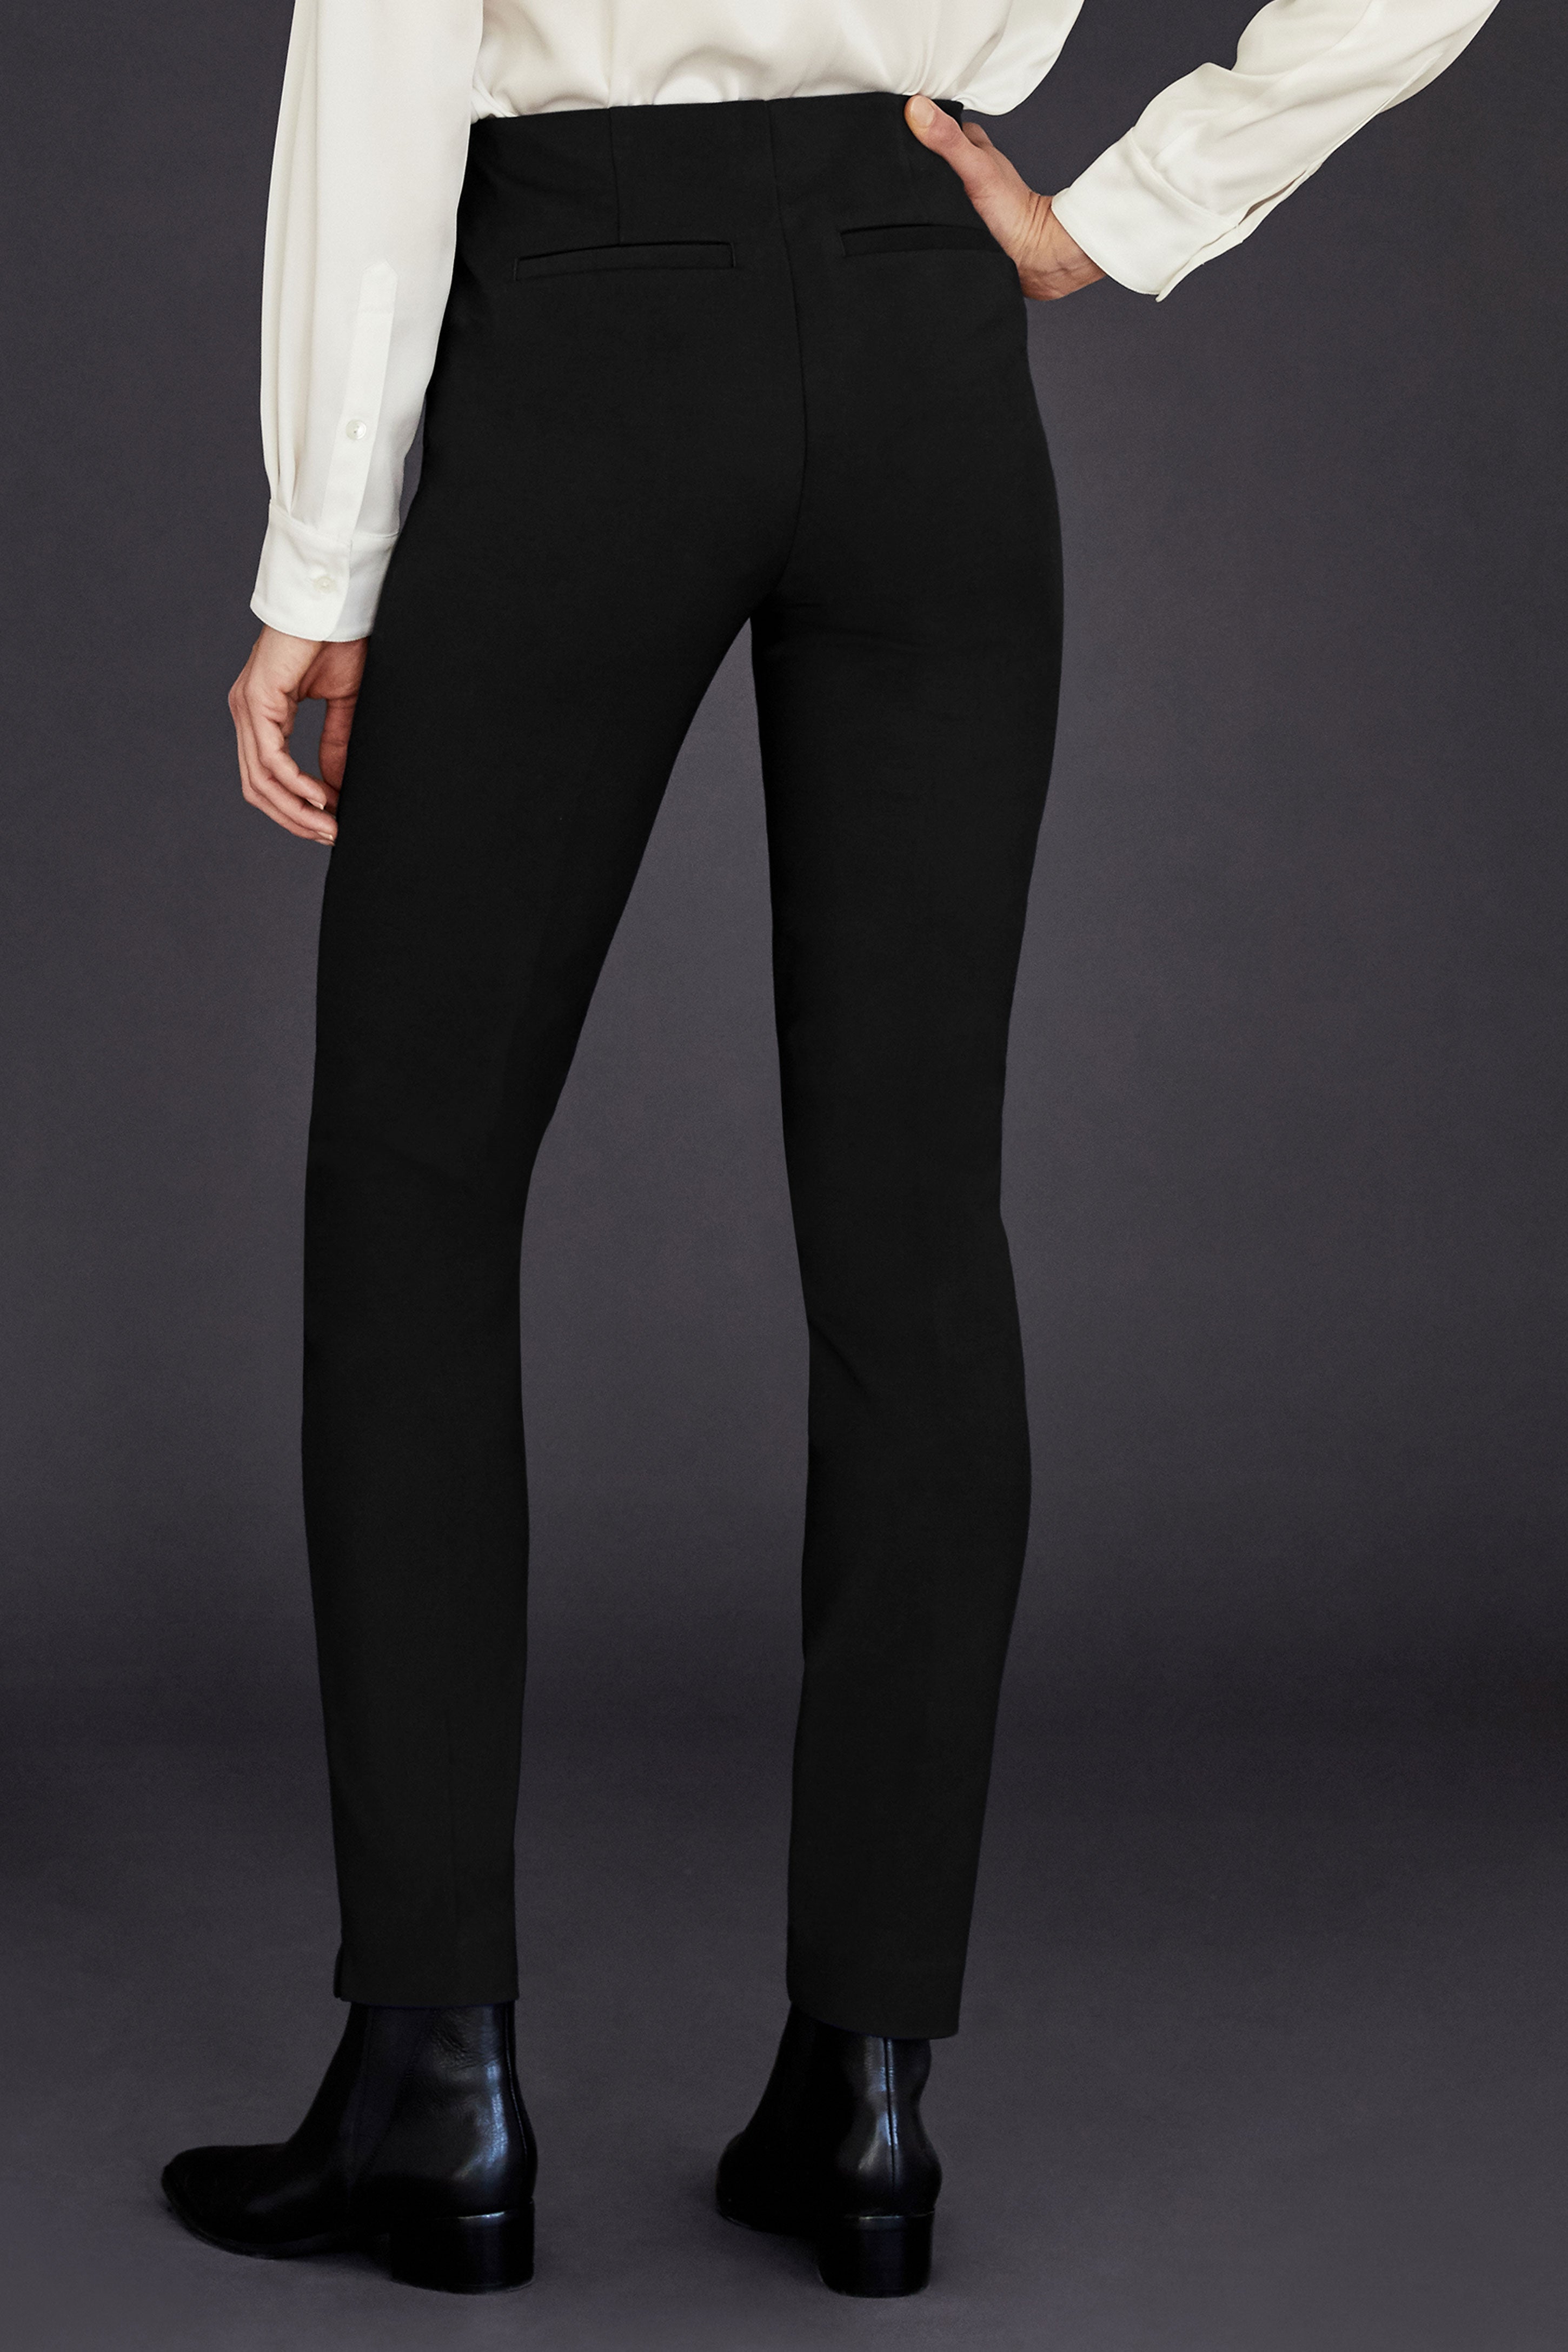 Springfield Tribeca Stretch Classic Pull On Pant